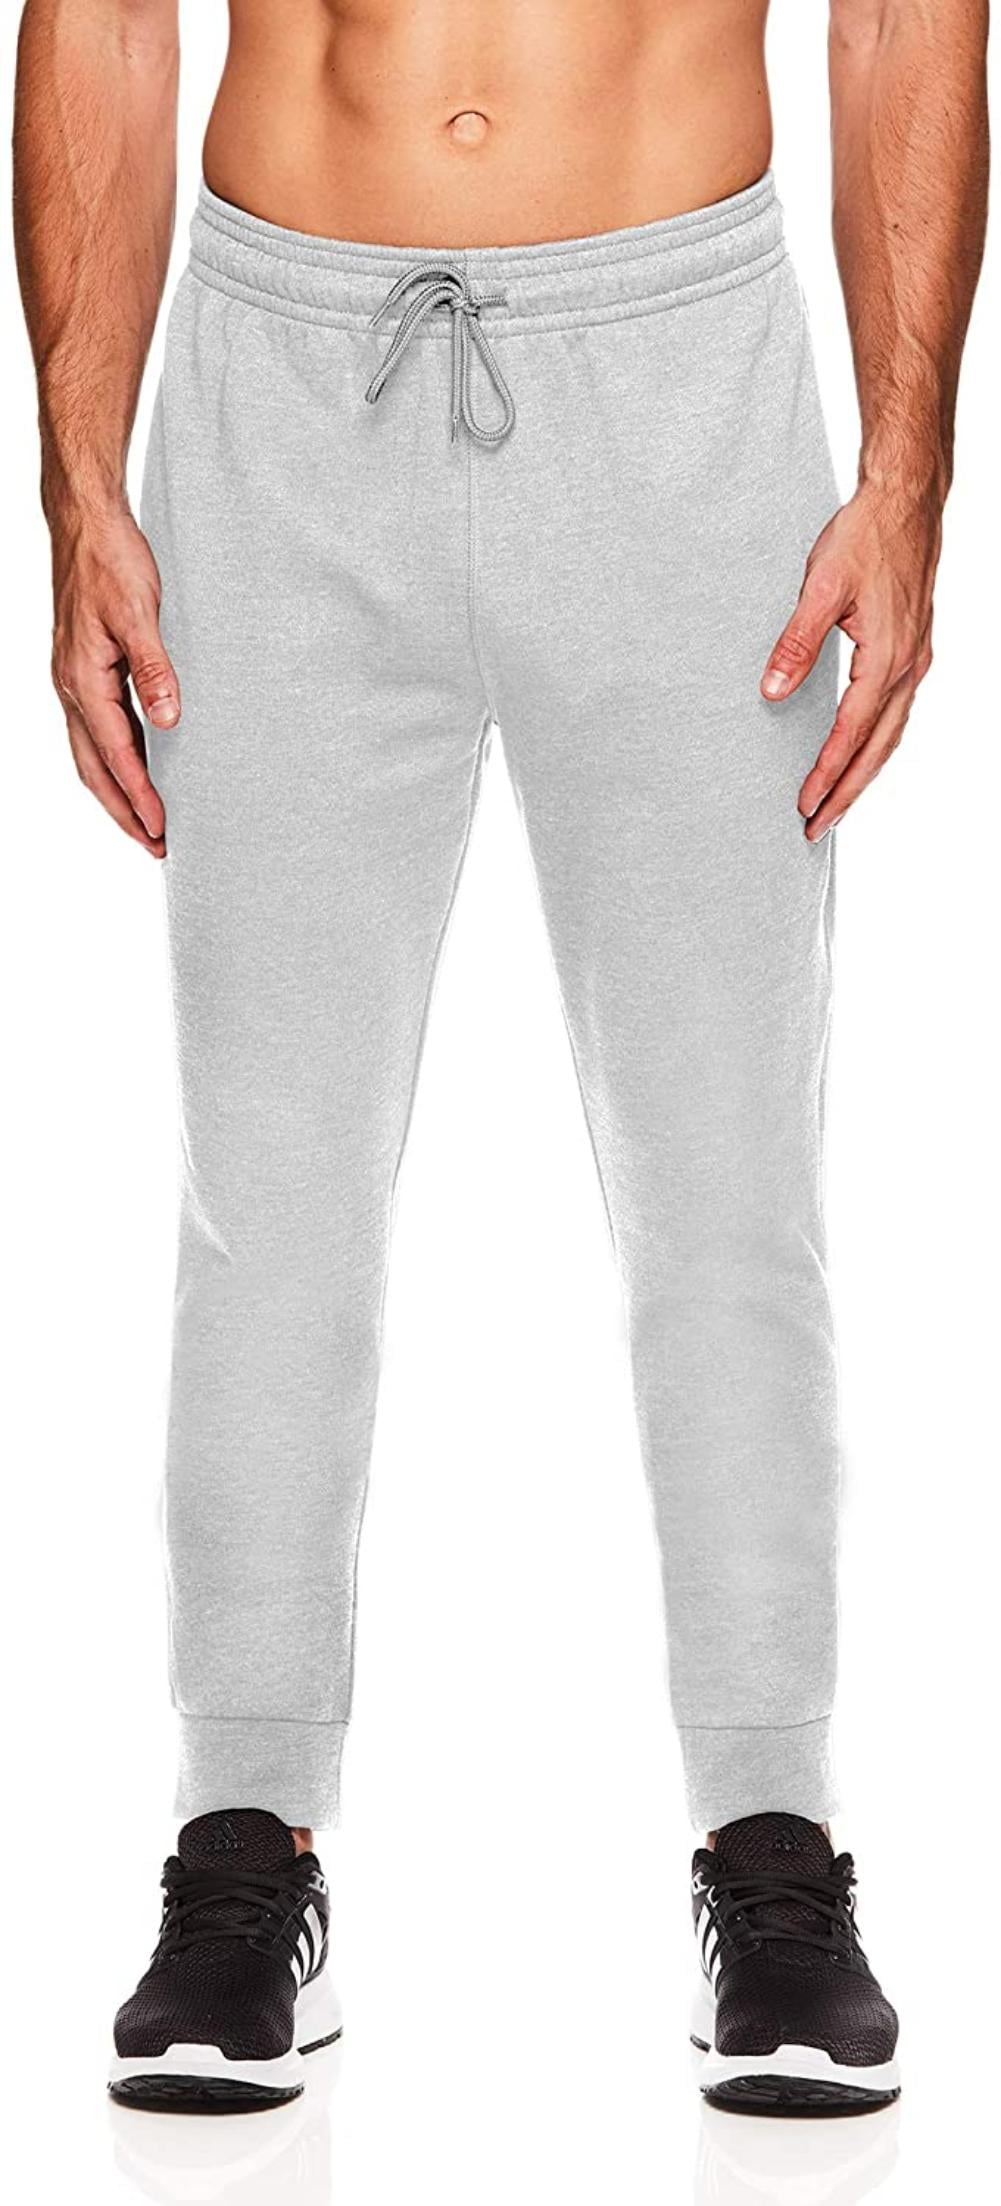 Performance Workout /& Running Sweatpants Small Ultra Navy Heather HEAD Mens Activewear Pants